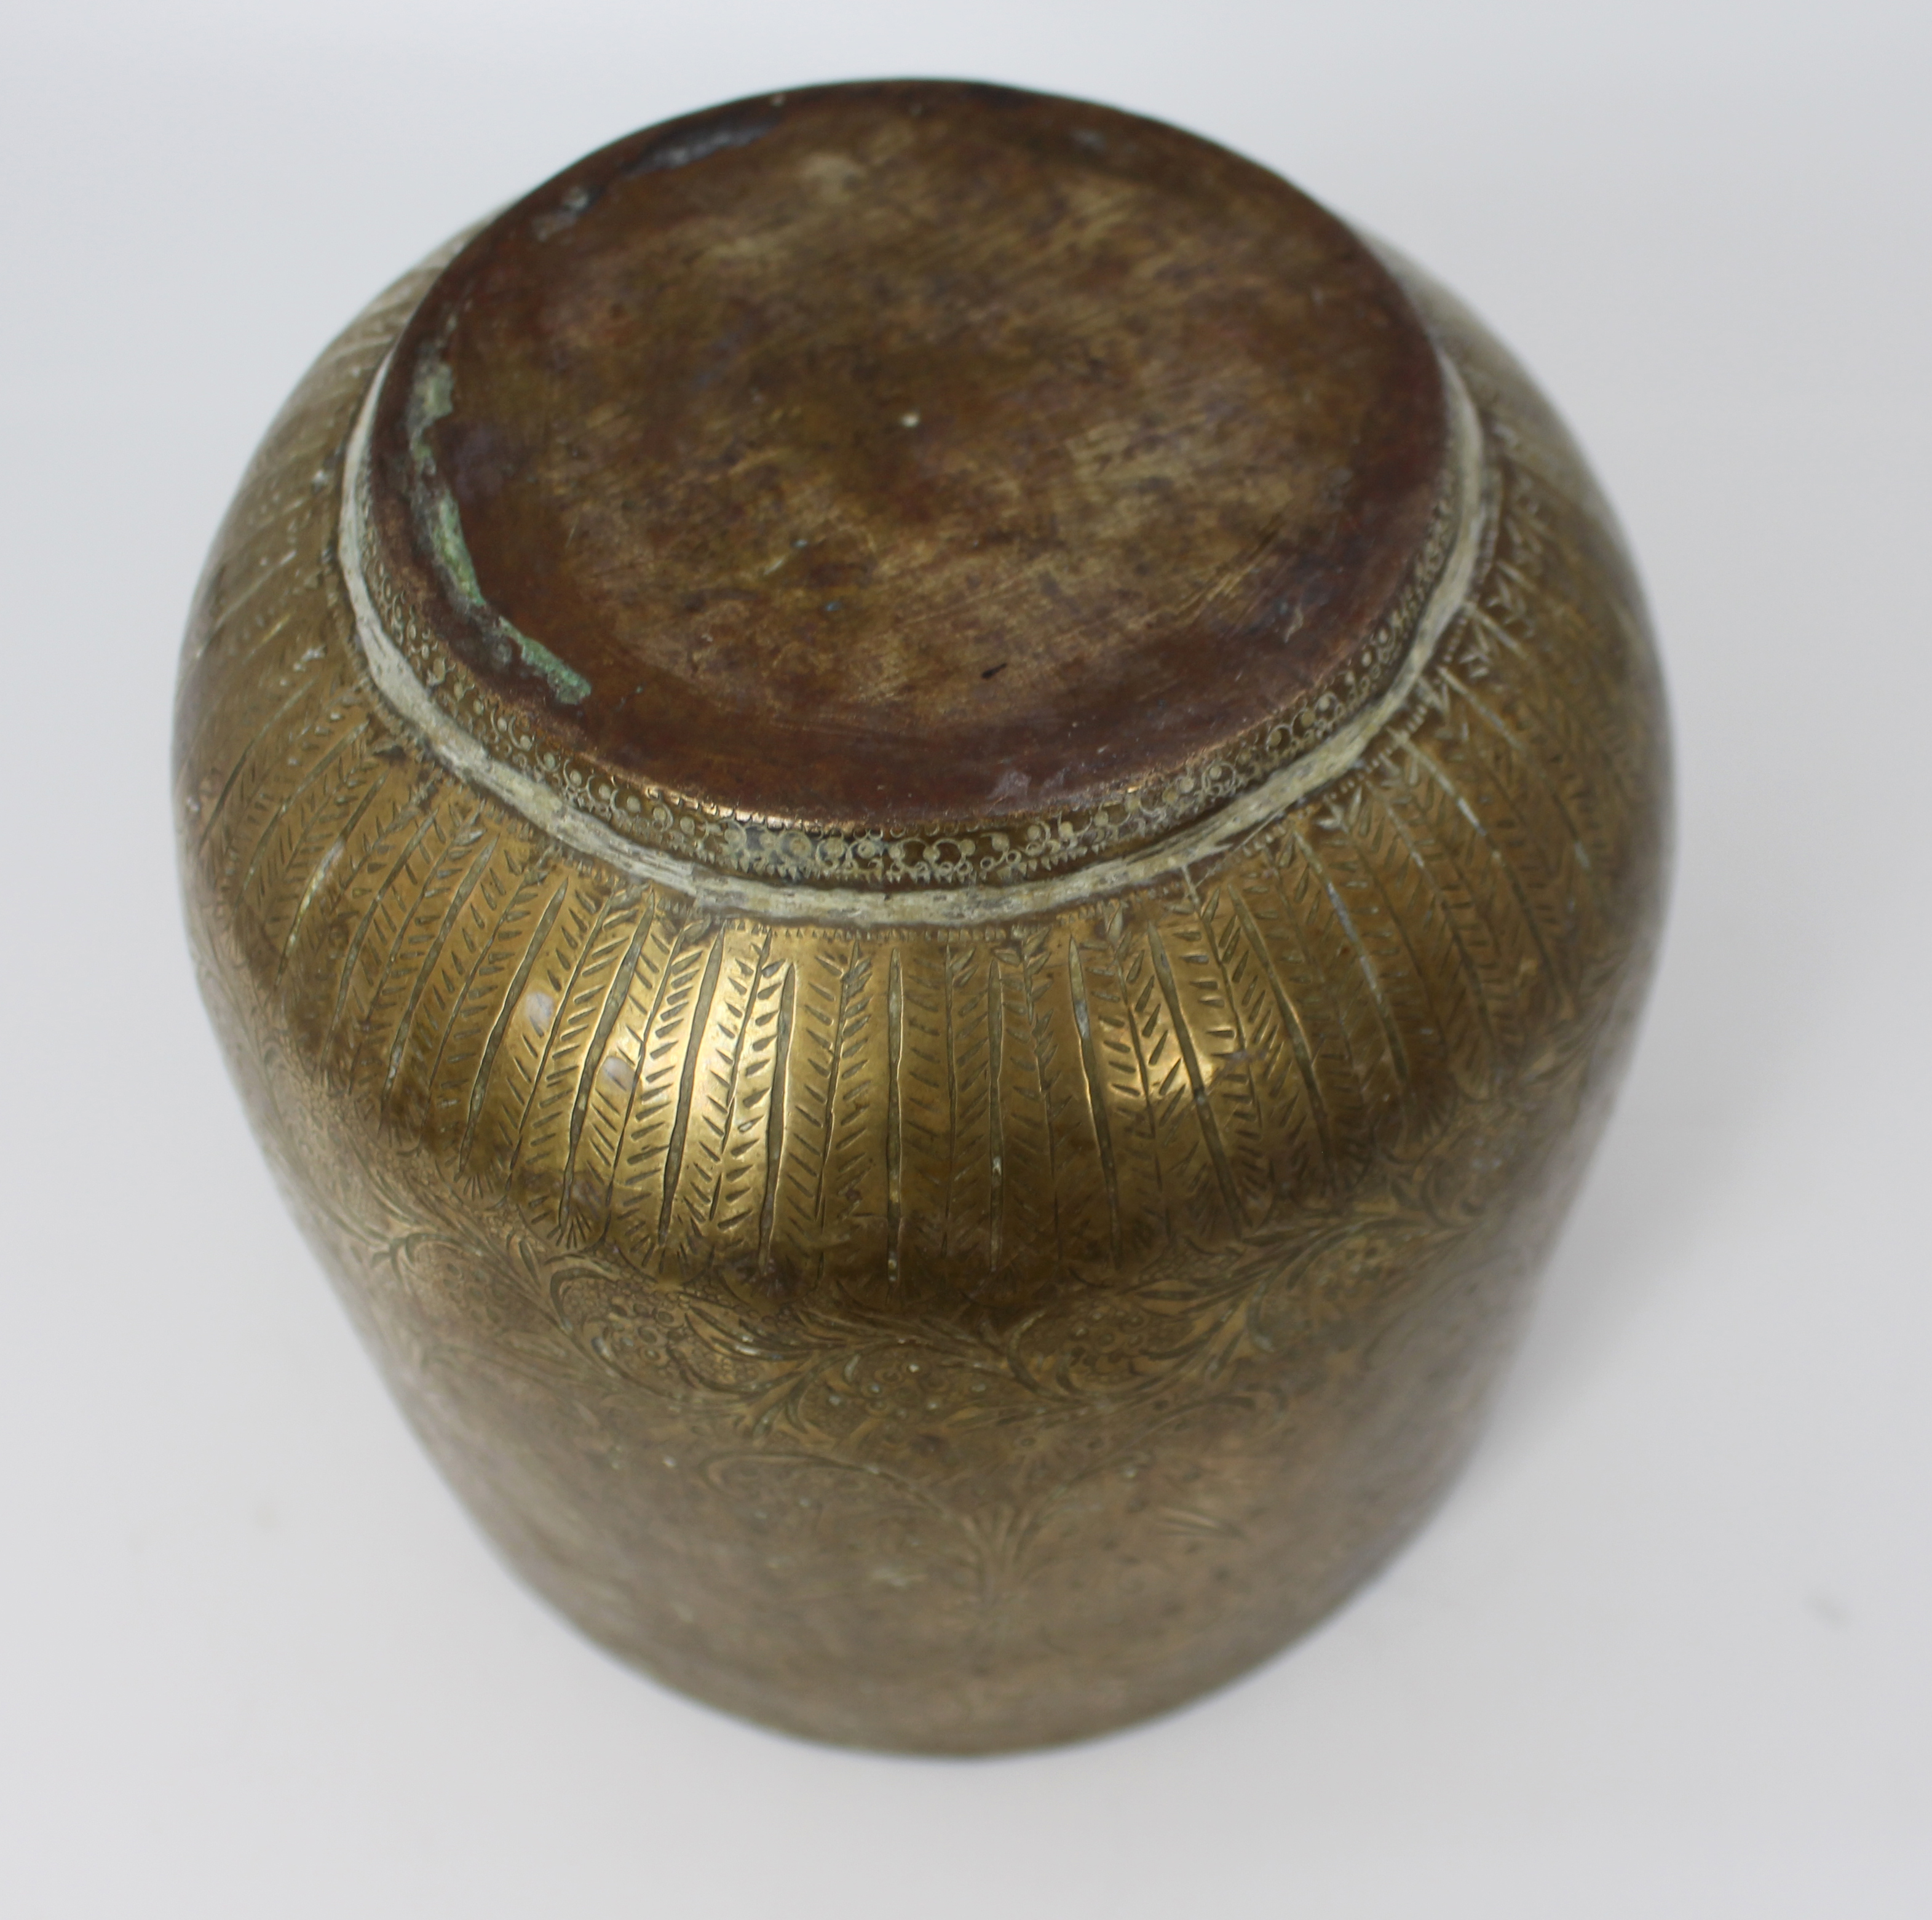 Antique Engraved Indian Brass Jardiniere Pot - Image 2 of 2